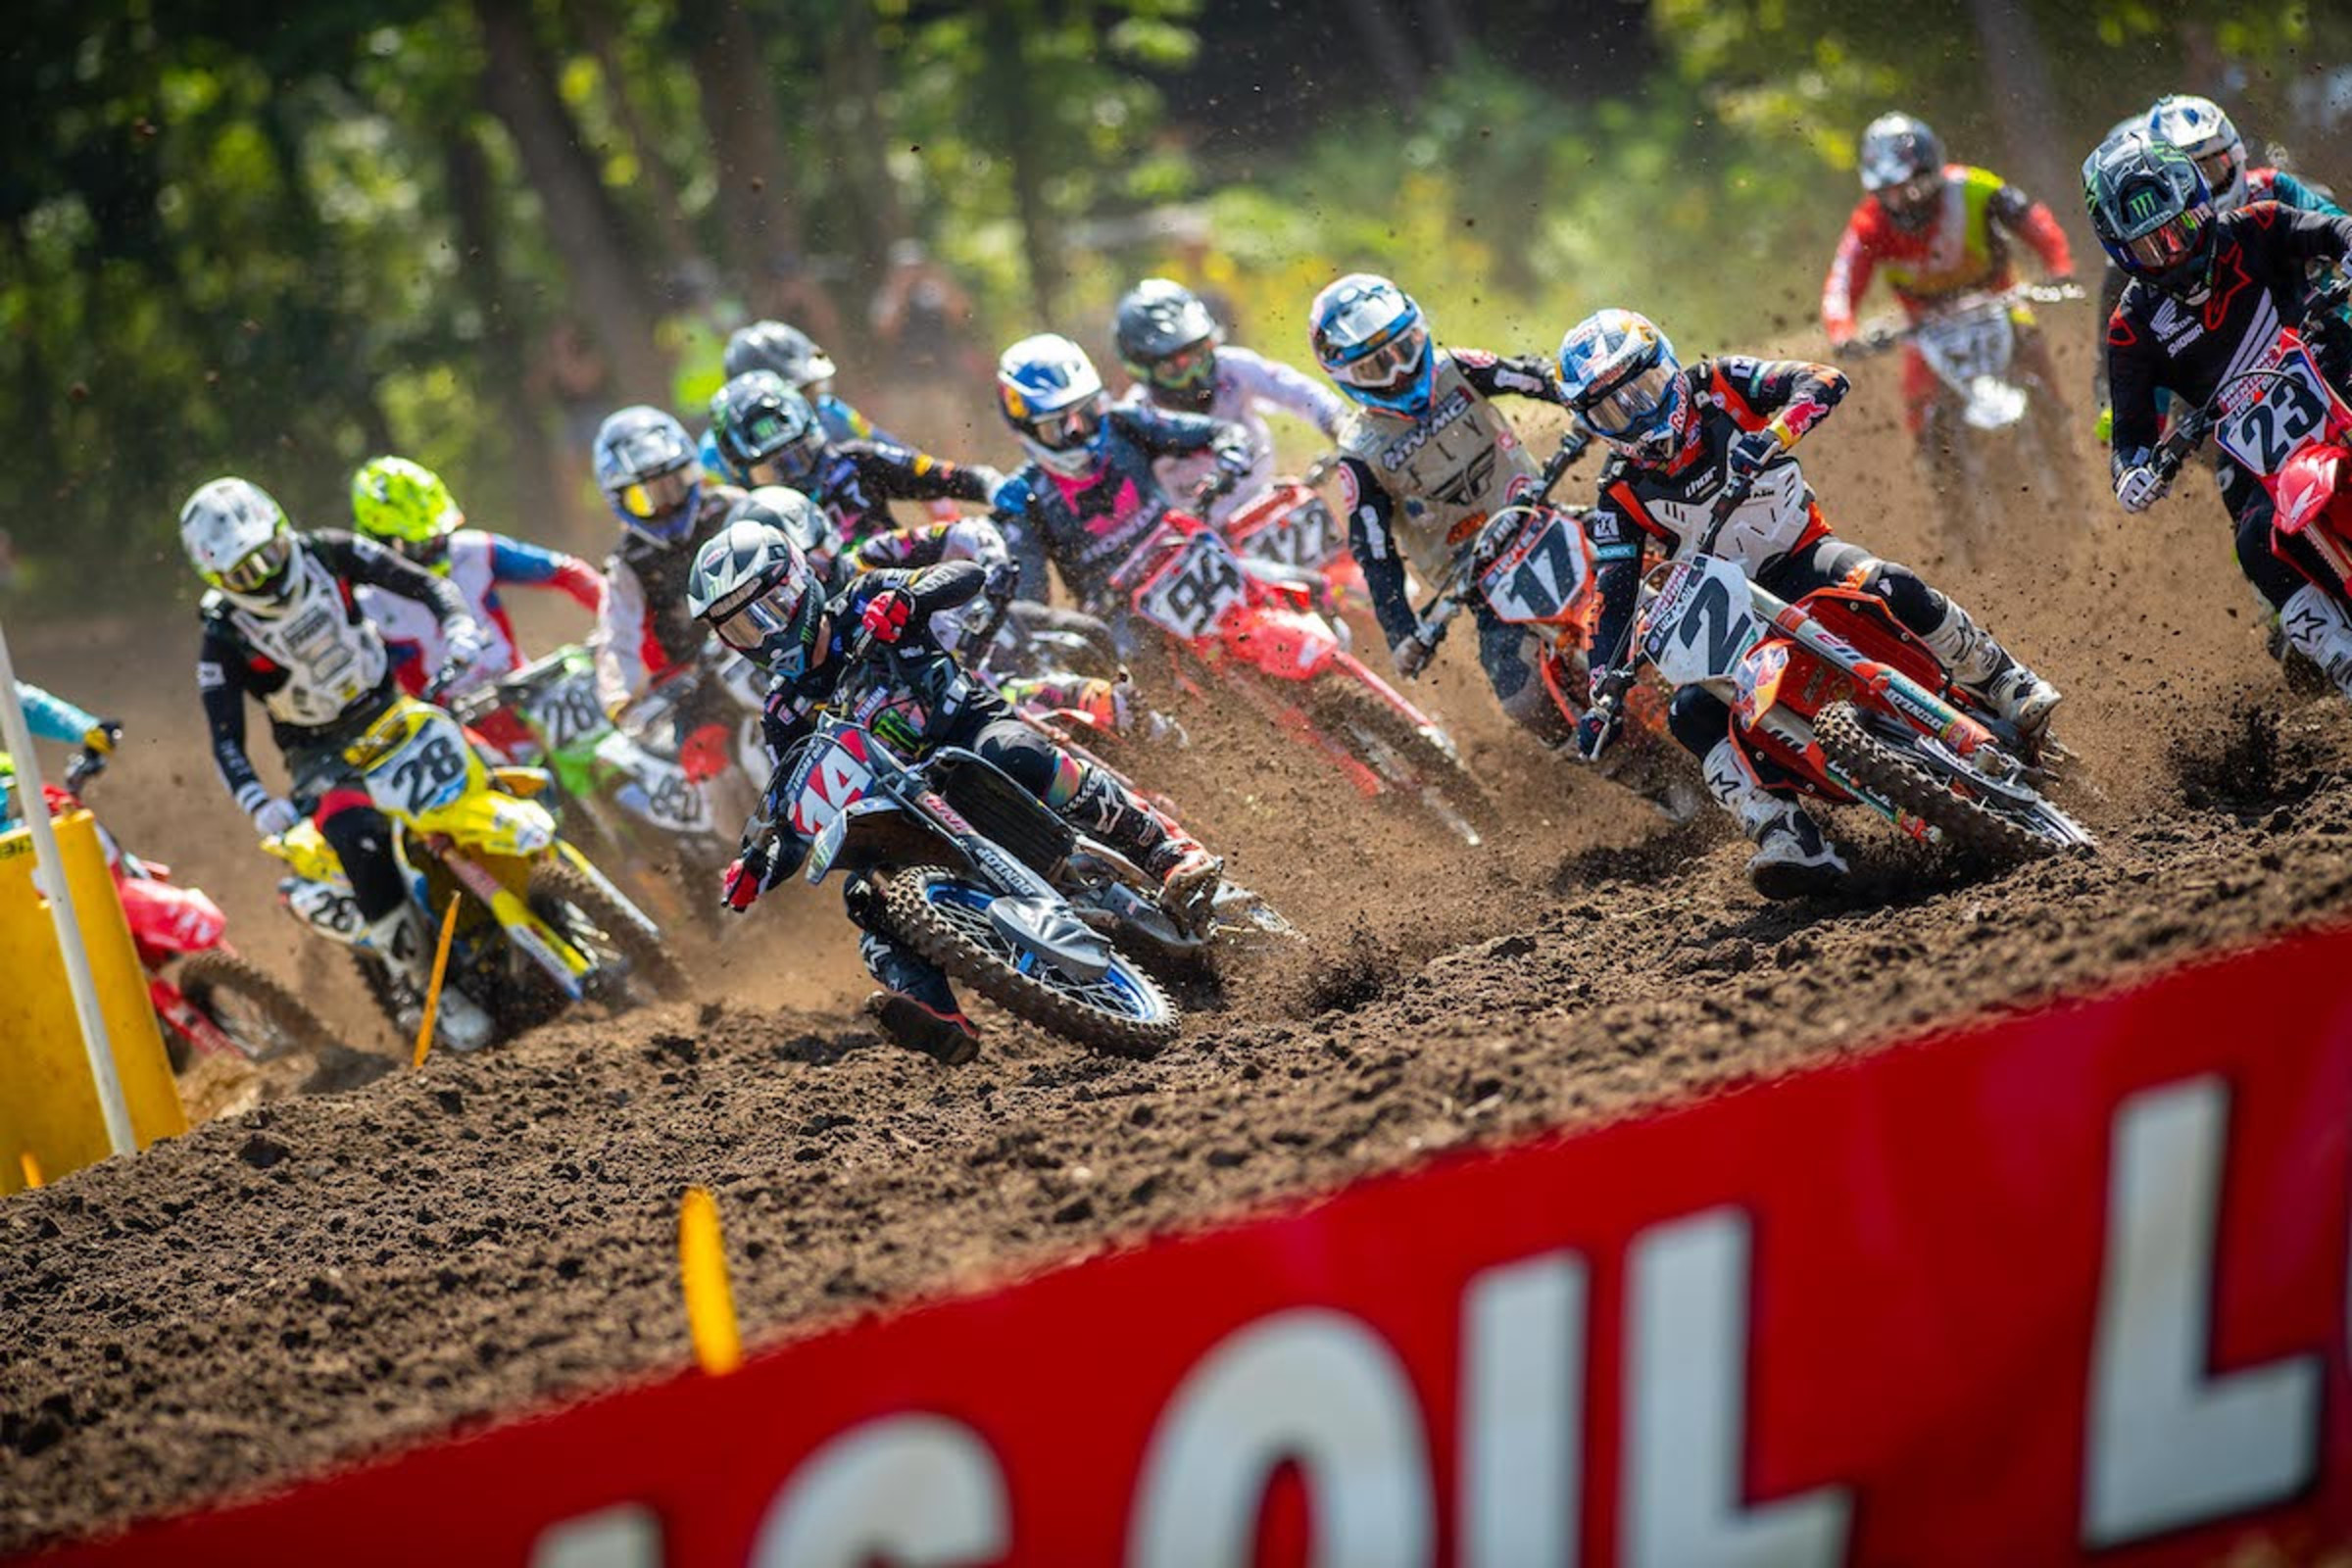 2022 Lucas Oil Pro Motocross Broadcast Package Announced, Expanded Partnership with MAVTV